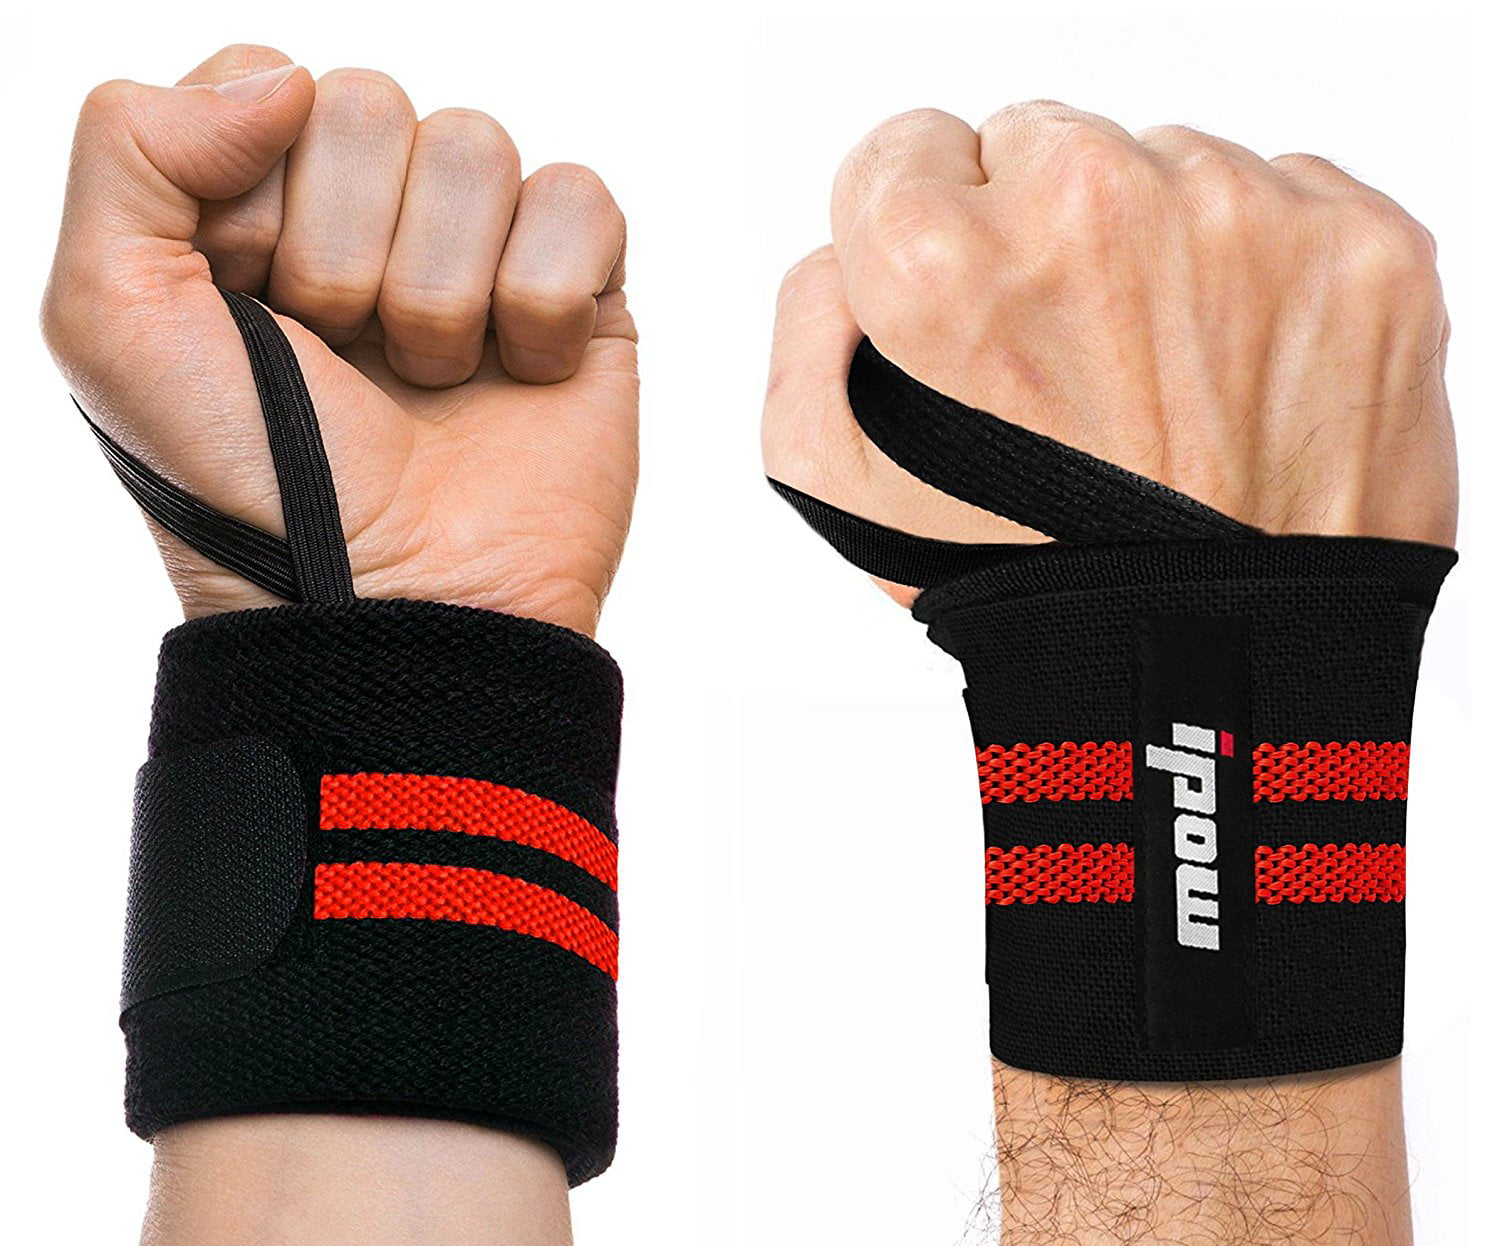 2PCS Weightlifting Wrist Straps Strength Training Adjustable Non